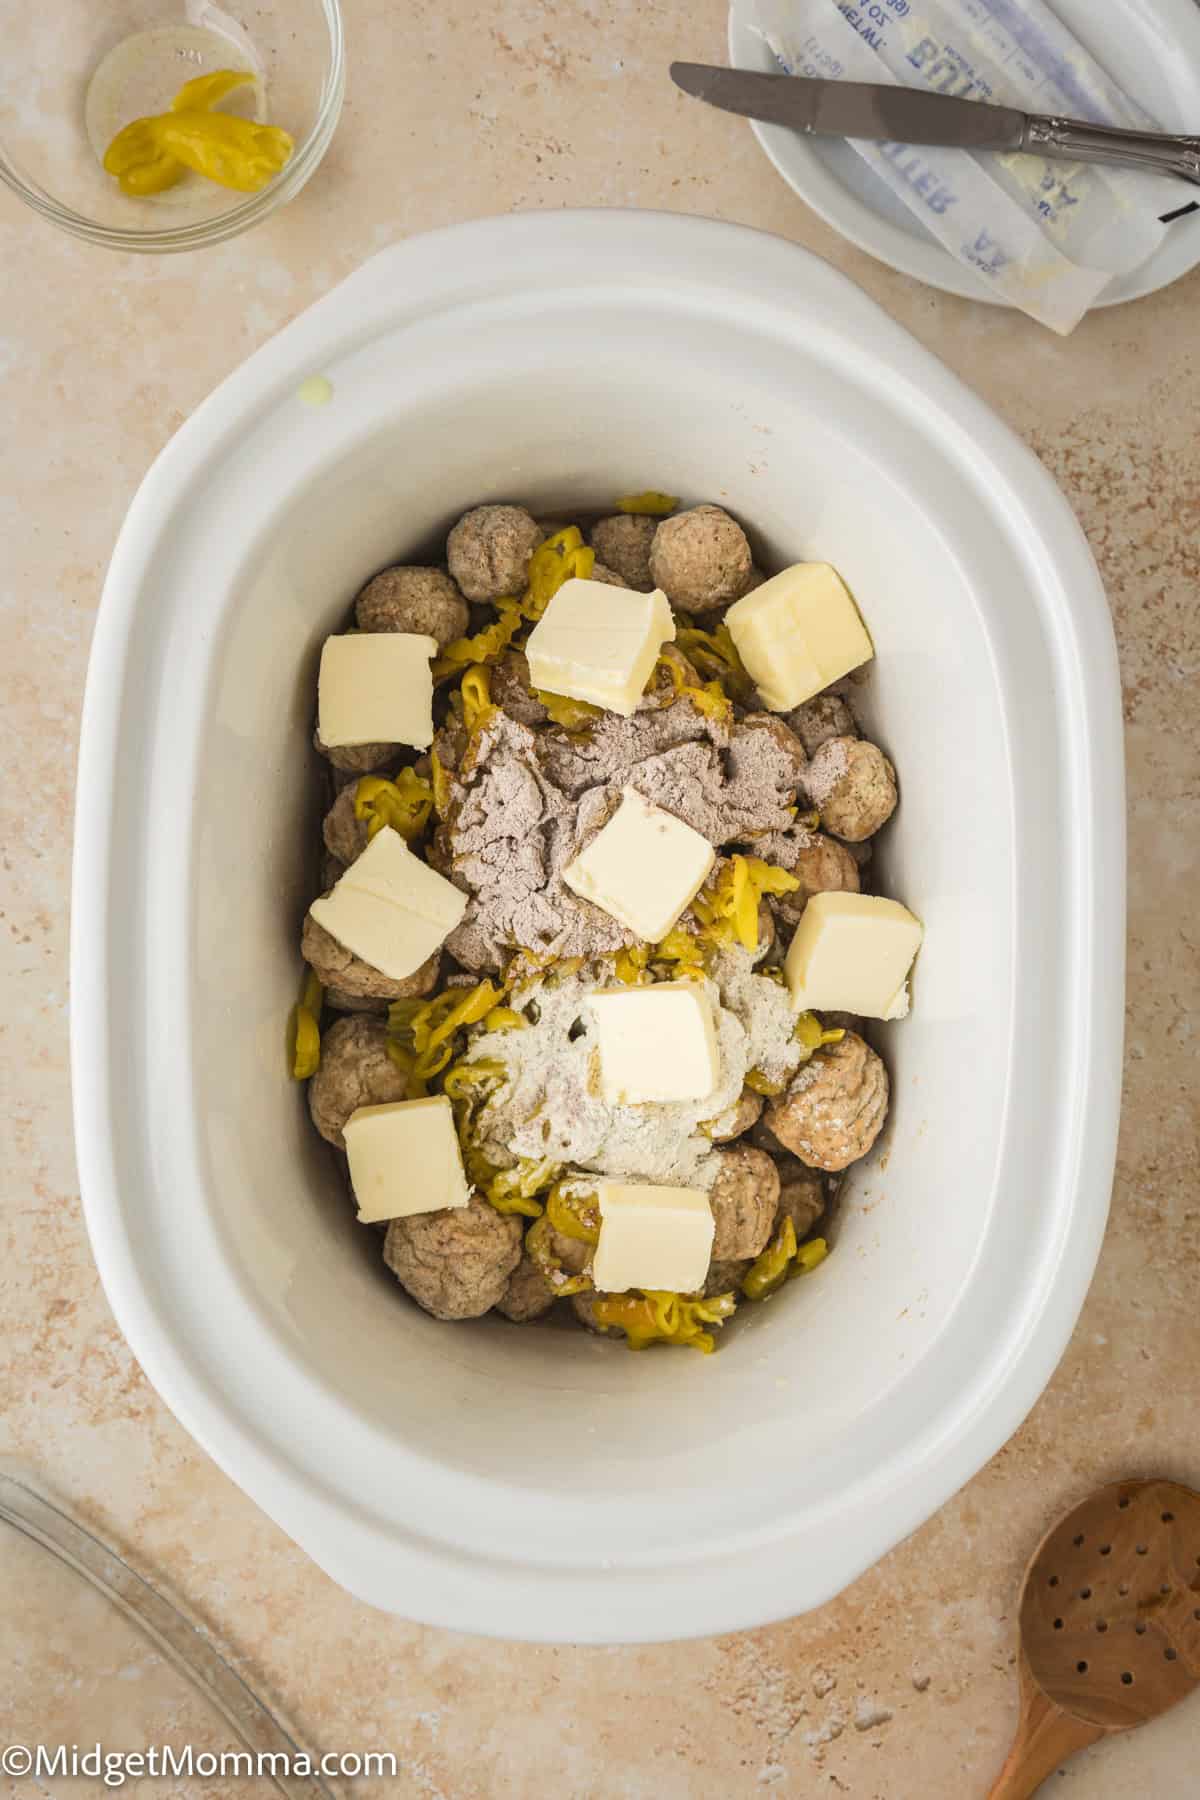 A slow cooker filled with meatballs, sliced yellow peppers, seasonings, and cubes of butter, ready to be cooked. A wooden spoon and a stick of butter are visible nearby.